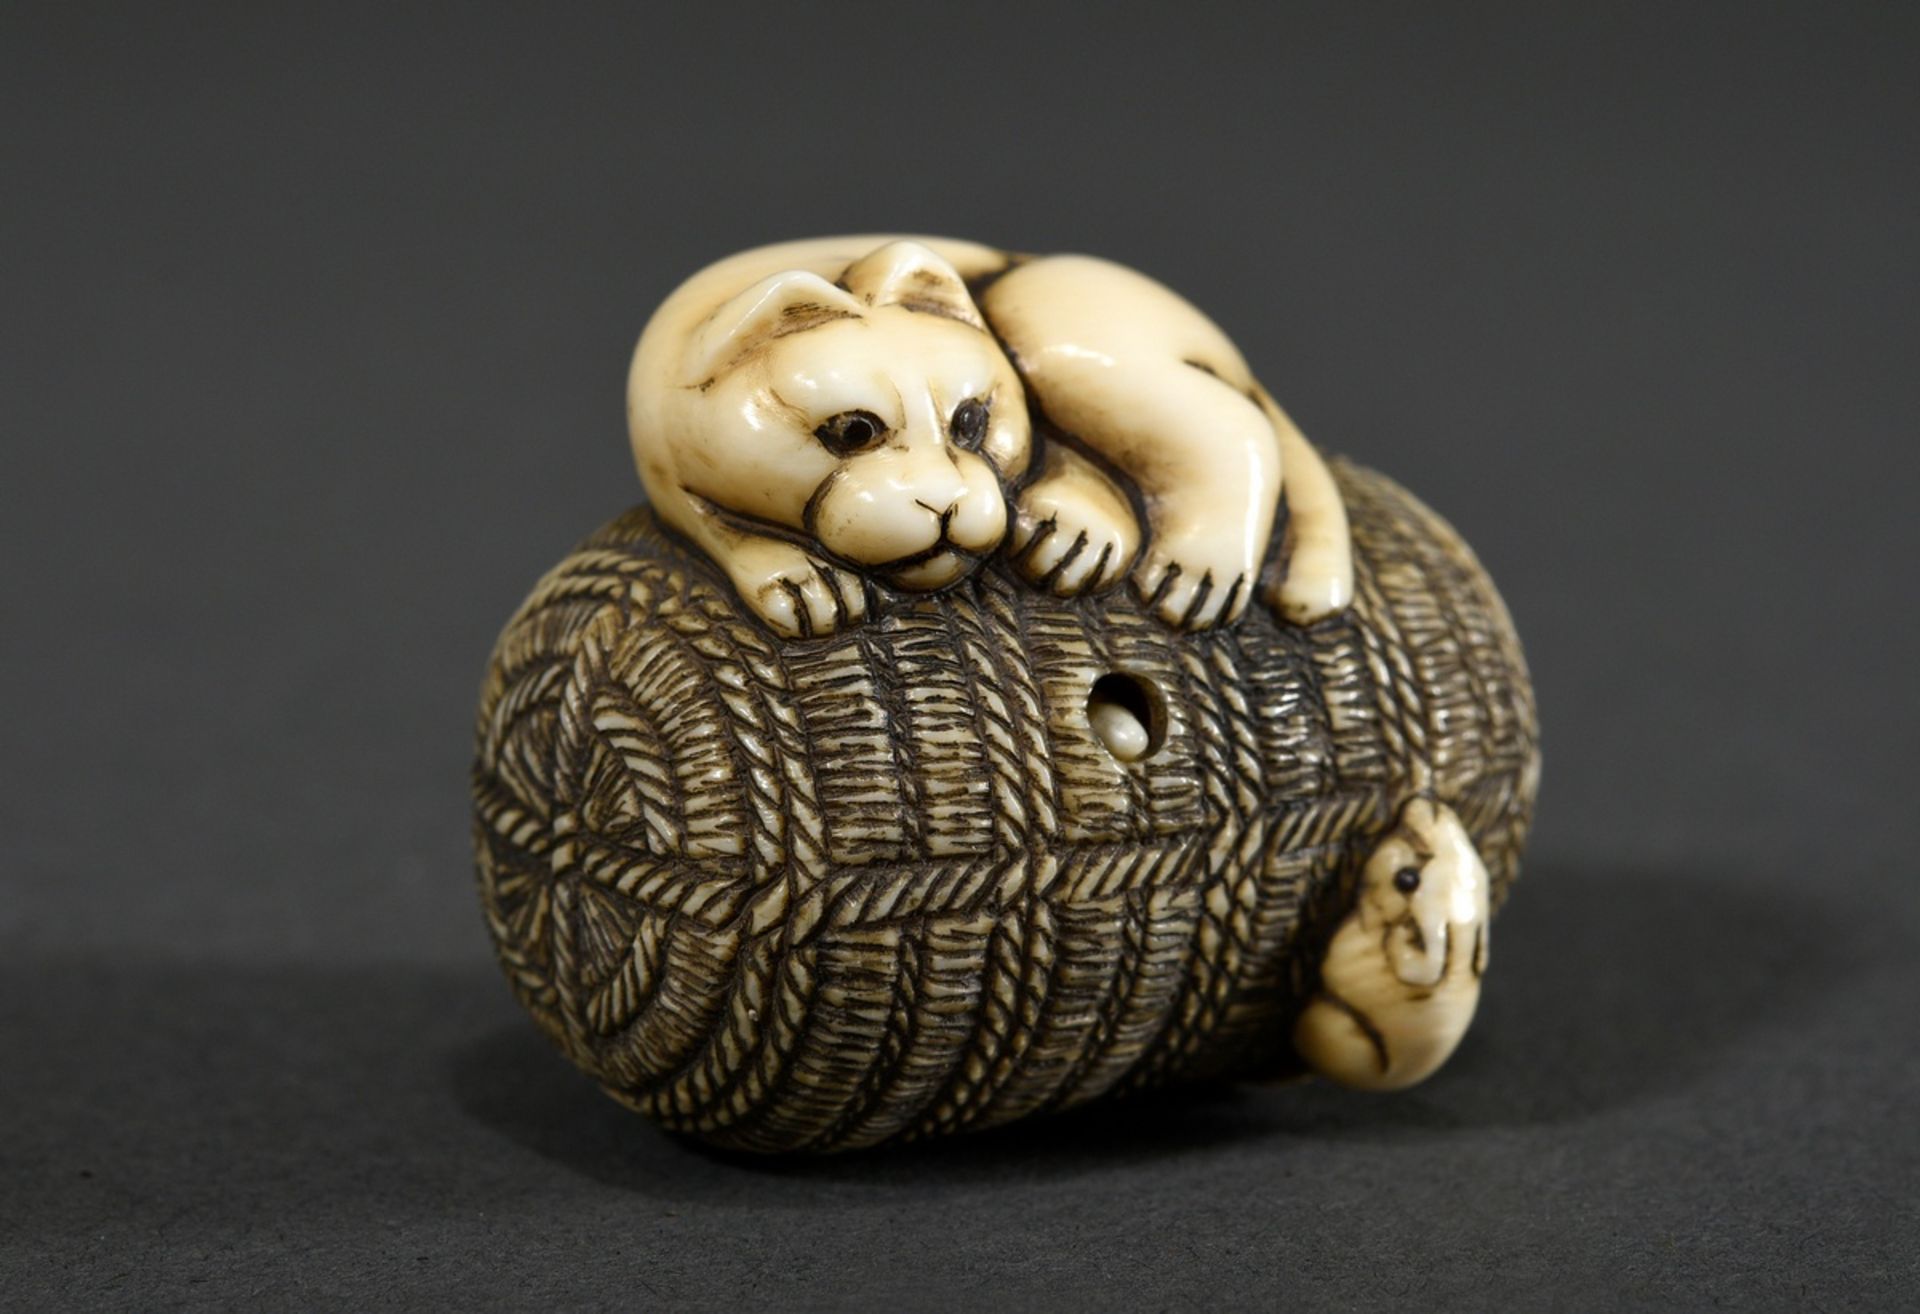 Ivory netsuke "Cat and rat on rice straw bale" with movable mouse, l. 3,6cm, permit according to ar